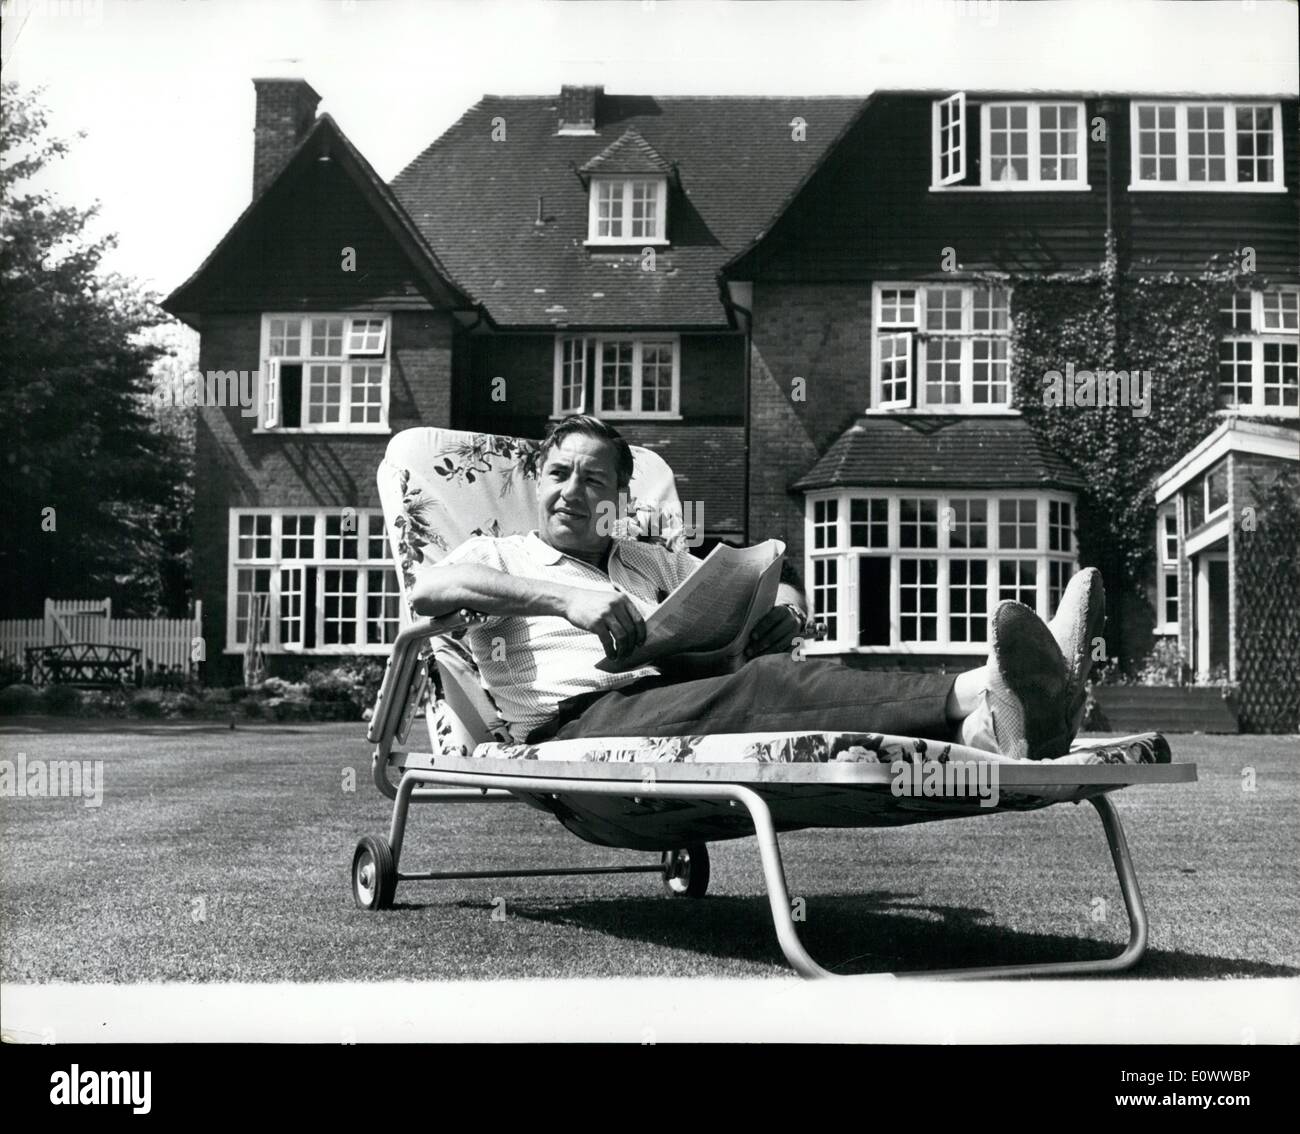 May 05, 1964 - The Man who dared to attack the Beatles. Relaxing in the sun on the lawn of his home in Chislehurst, Kent, is Lord Willis (scriptwriter Ted Willis and creator of the Dixon of Dock Green Series) who deos not appear worried by the remarks which followed his attack on the Beatles during a House of Lord debate on leisure. He called the modern pop ''a primitive dance a ritual pep pill. Stock Photo